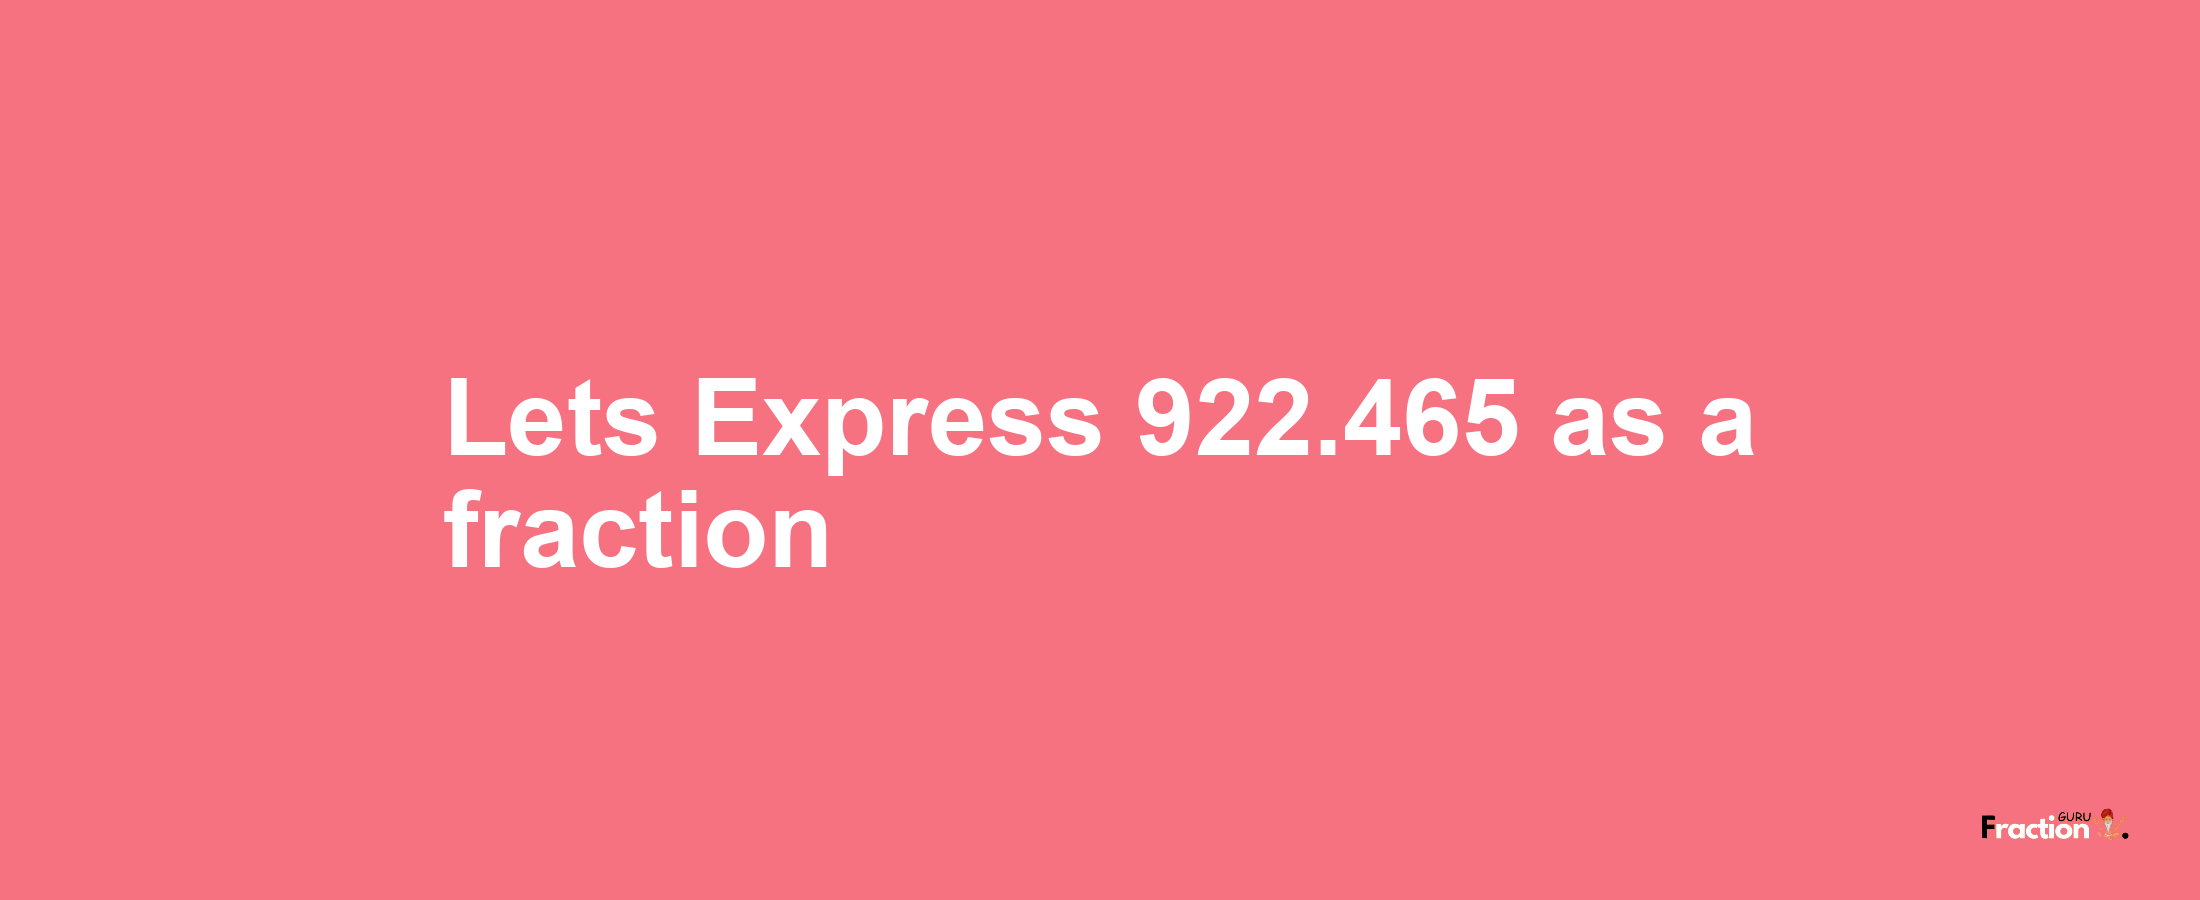 Lets Express 922.465 as afraction